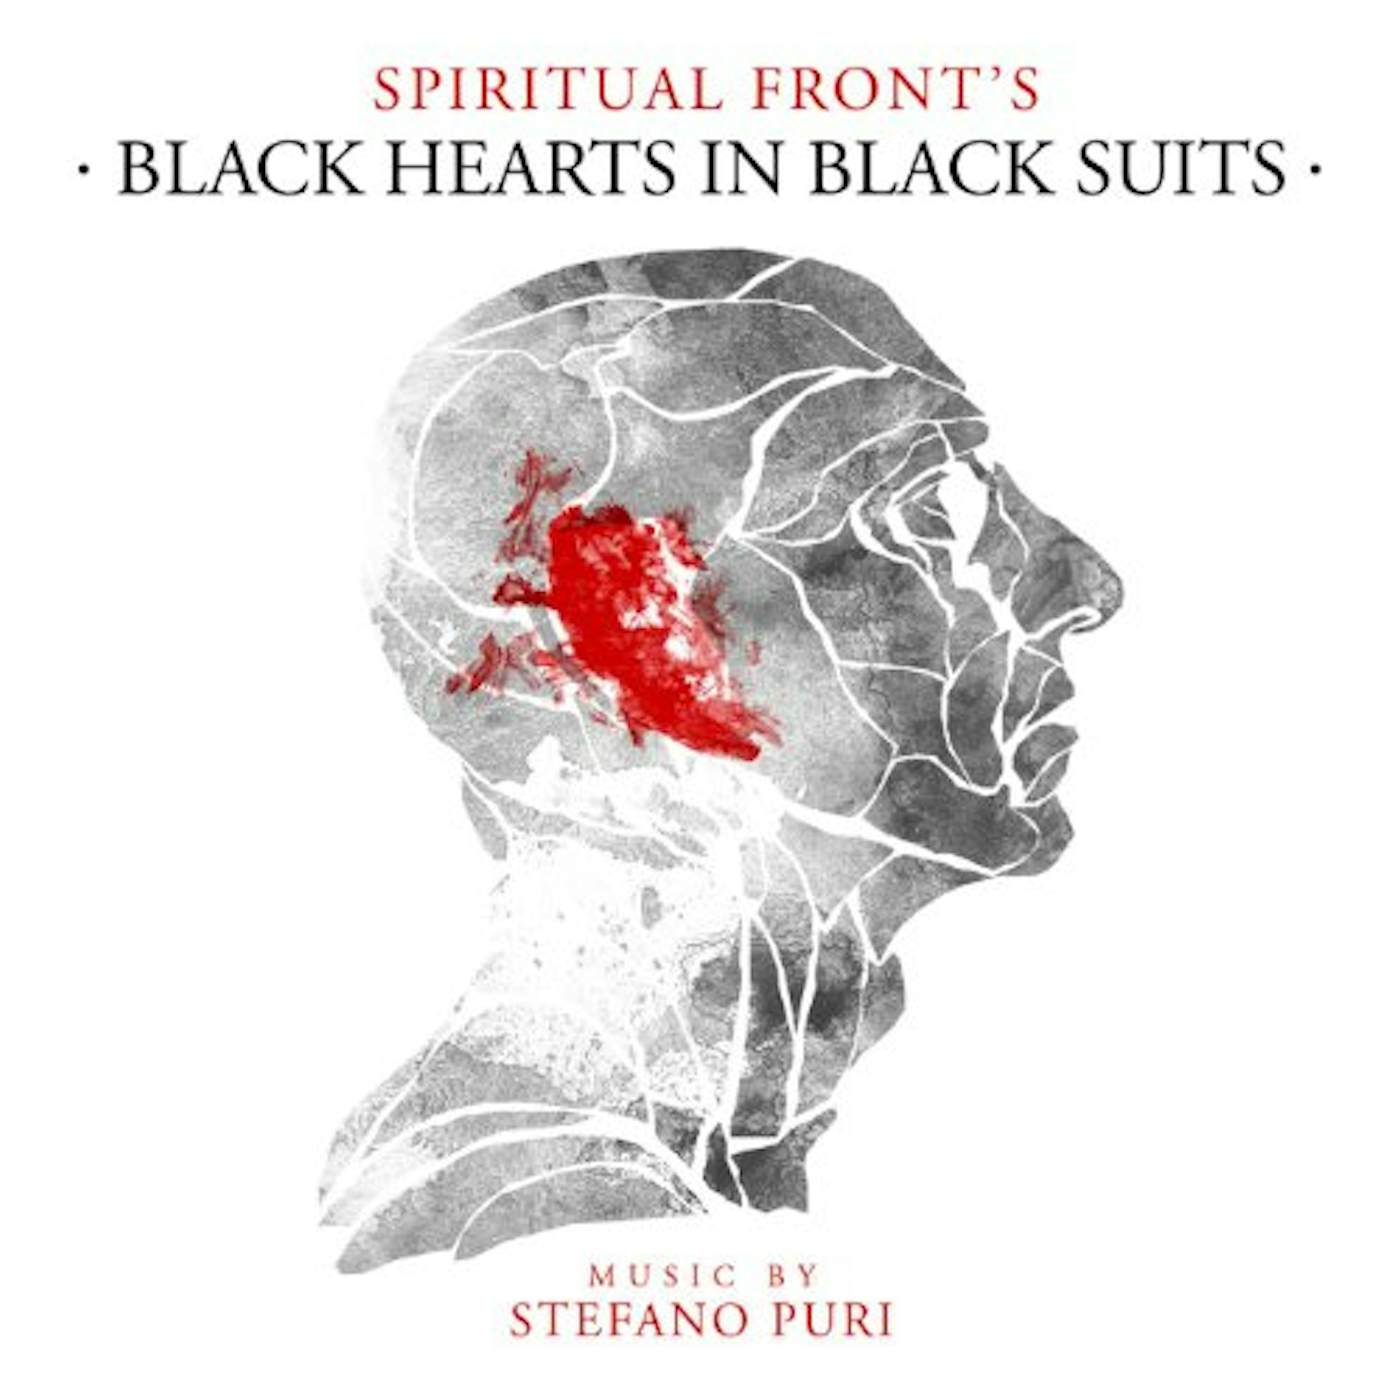 Spiritual Front Black Hearts in Black Suits Vinyl Record